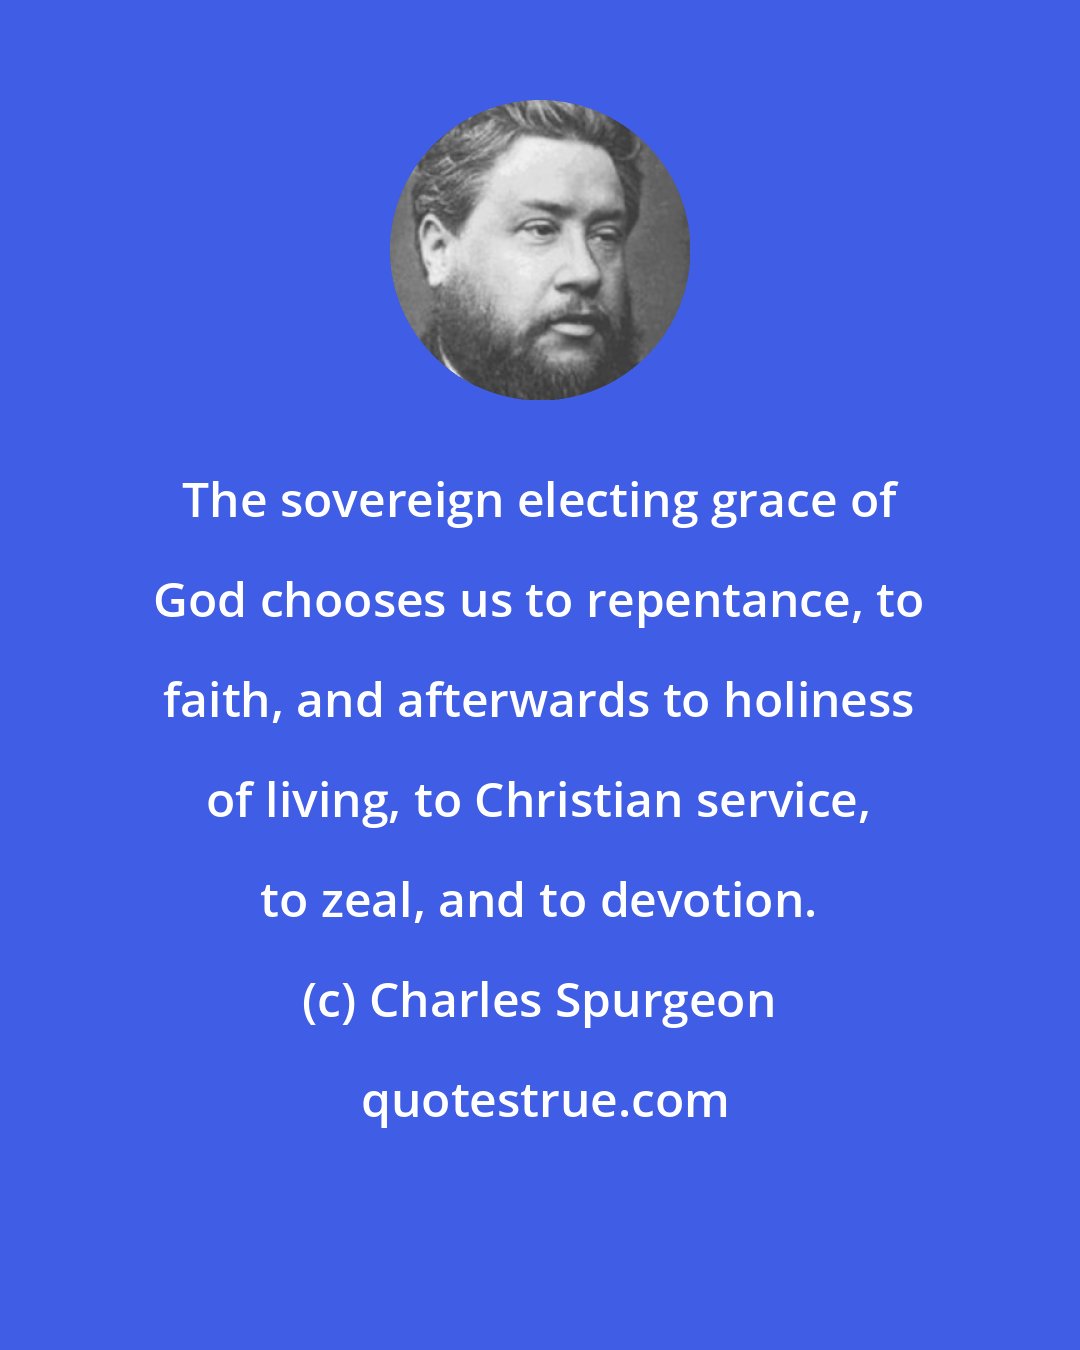 Charles Spurgeon: The sovereign electing grace of God chooses us to repentance, to faith, and afterwards to holiness of living, to Christian service, to zeal, and to devotion.